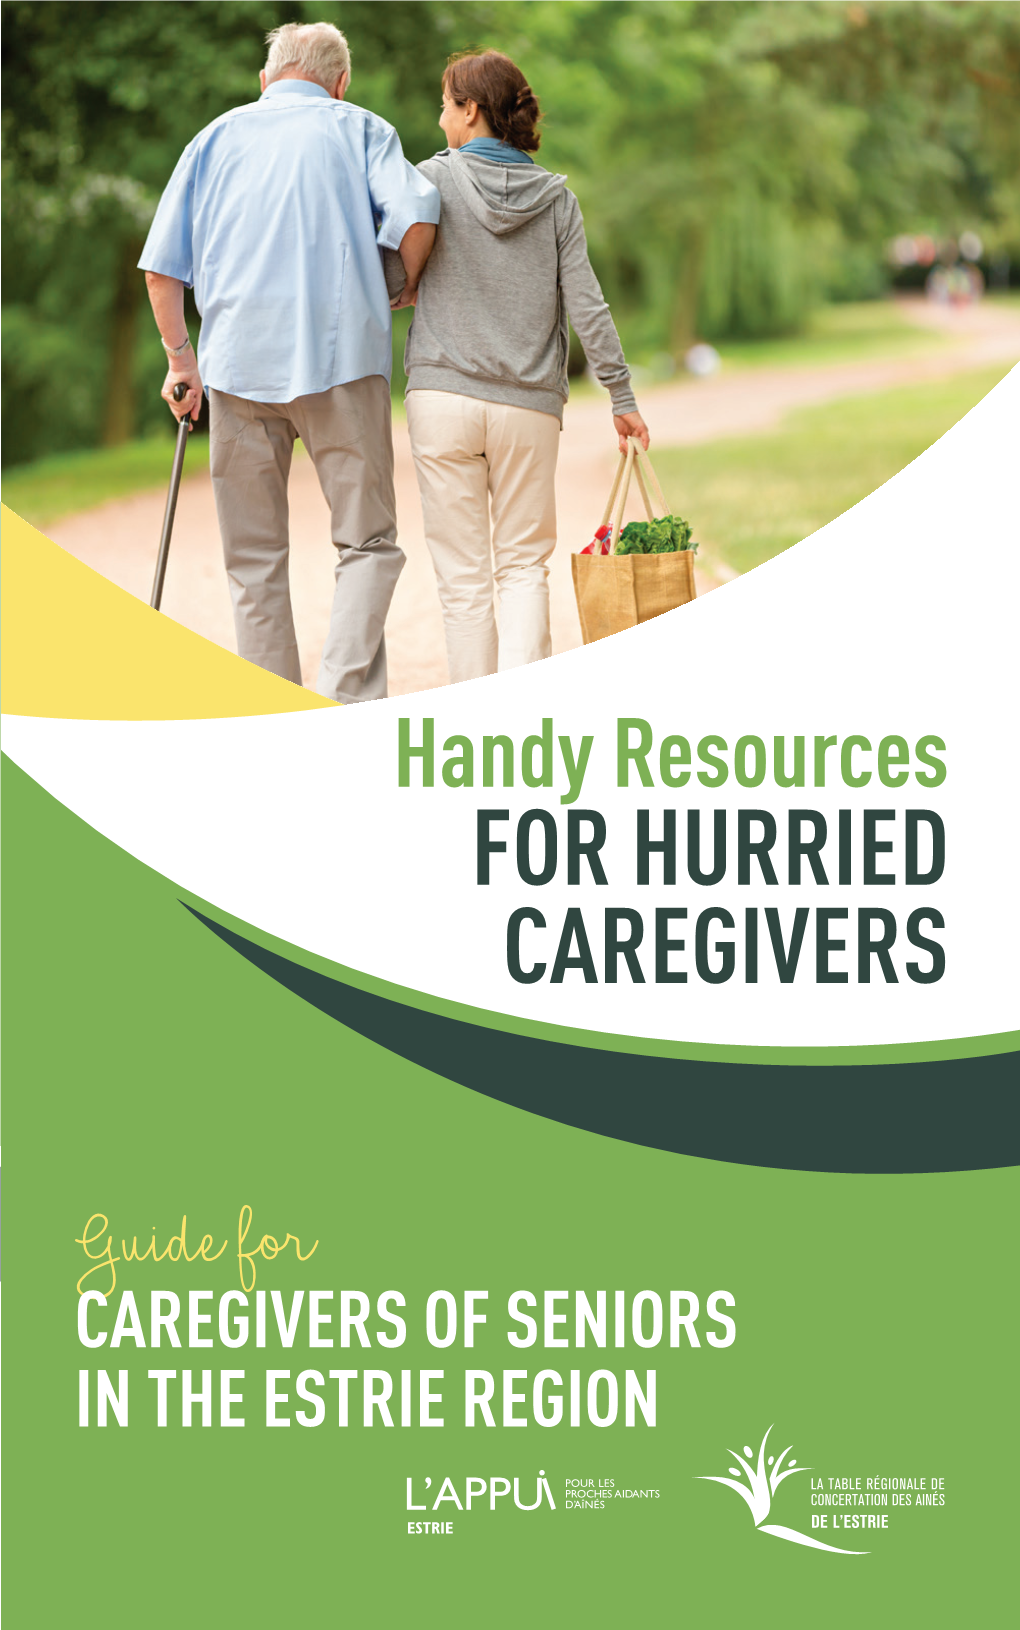 For Hurried Caregivers